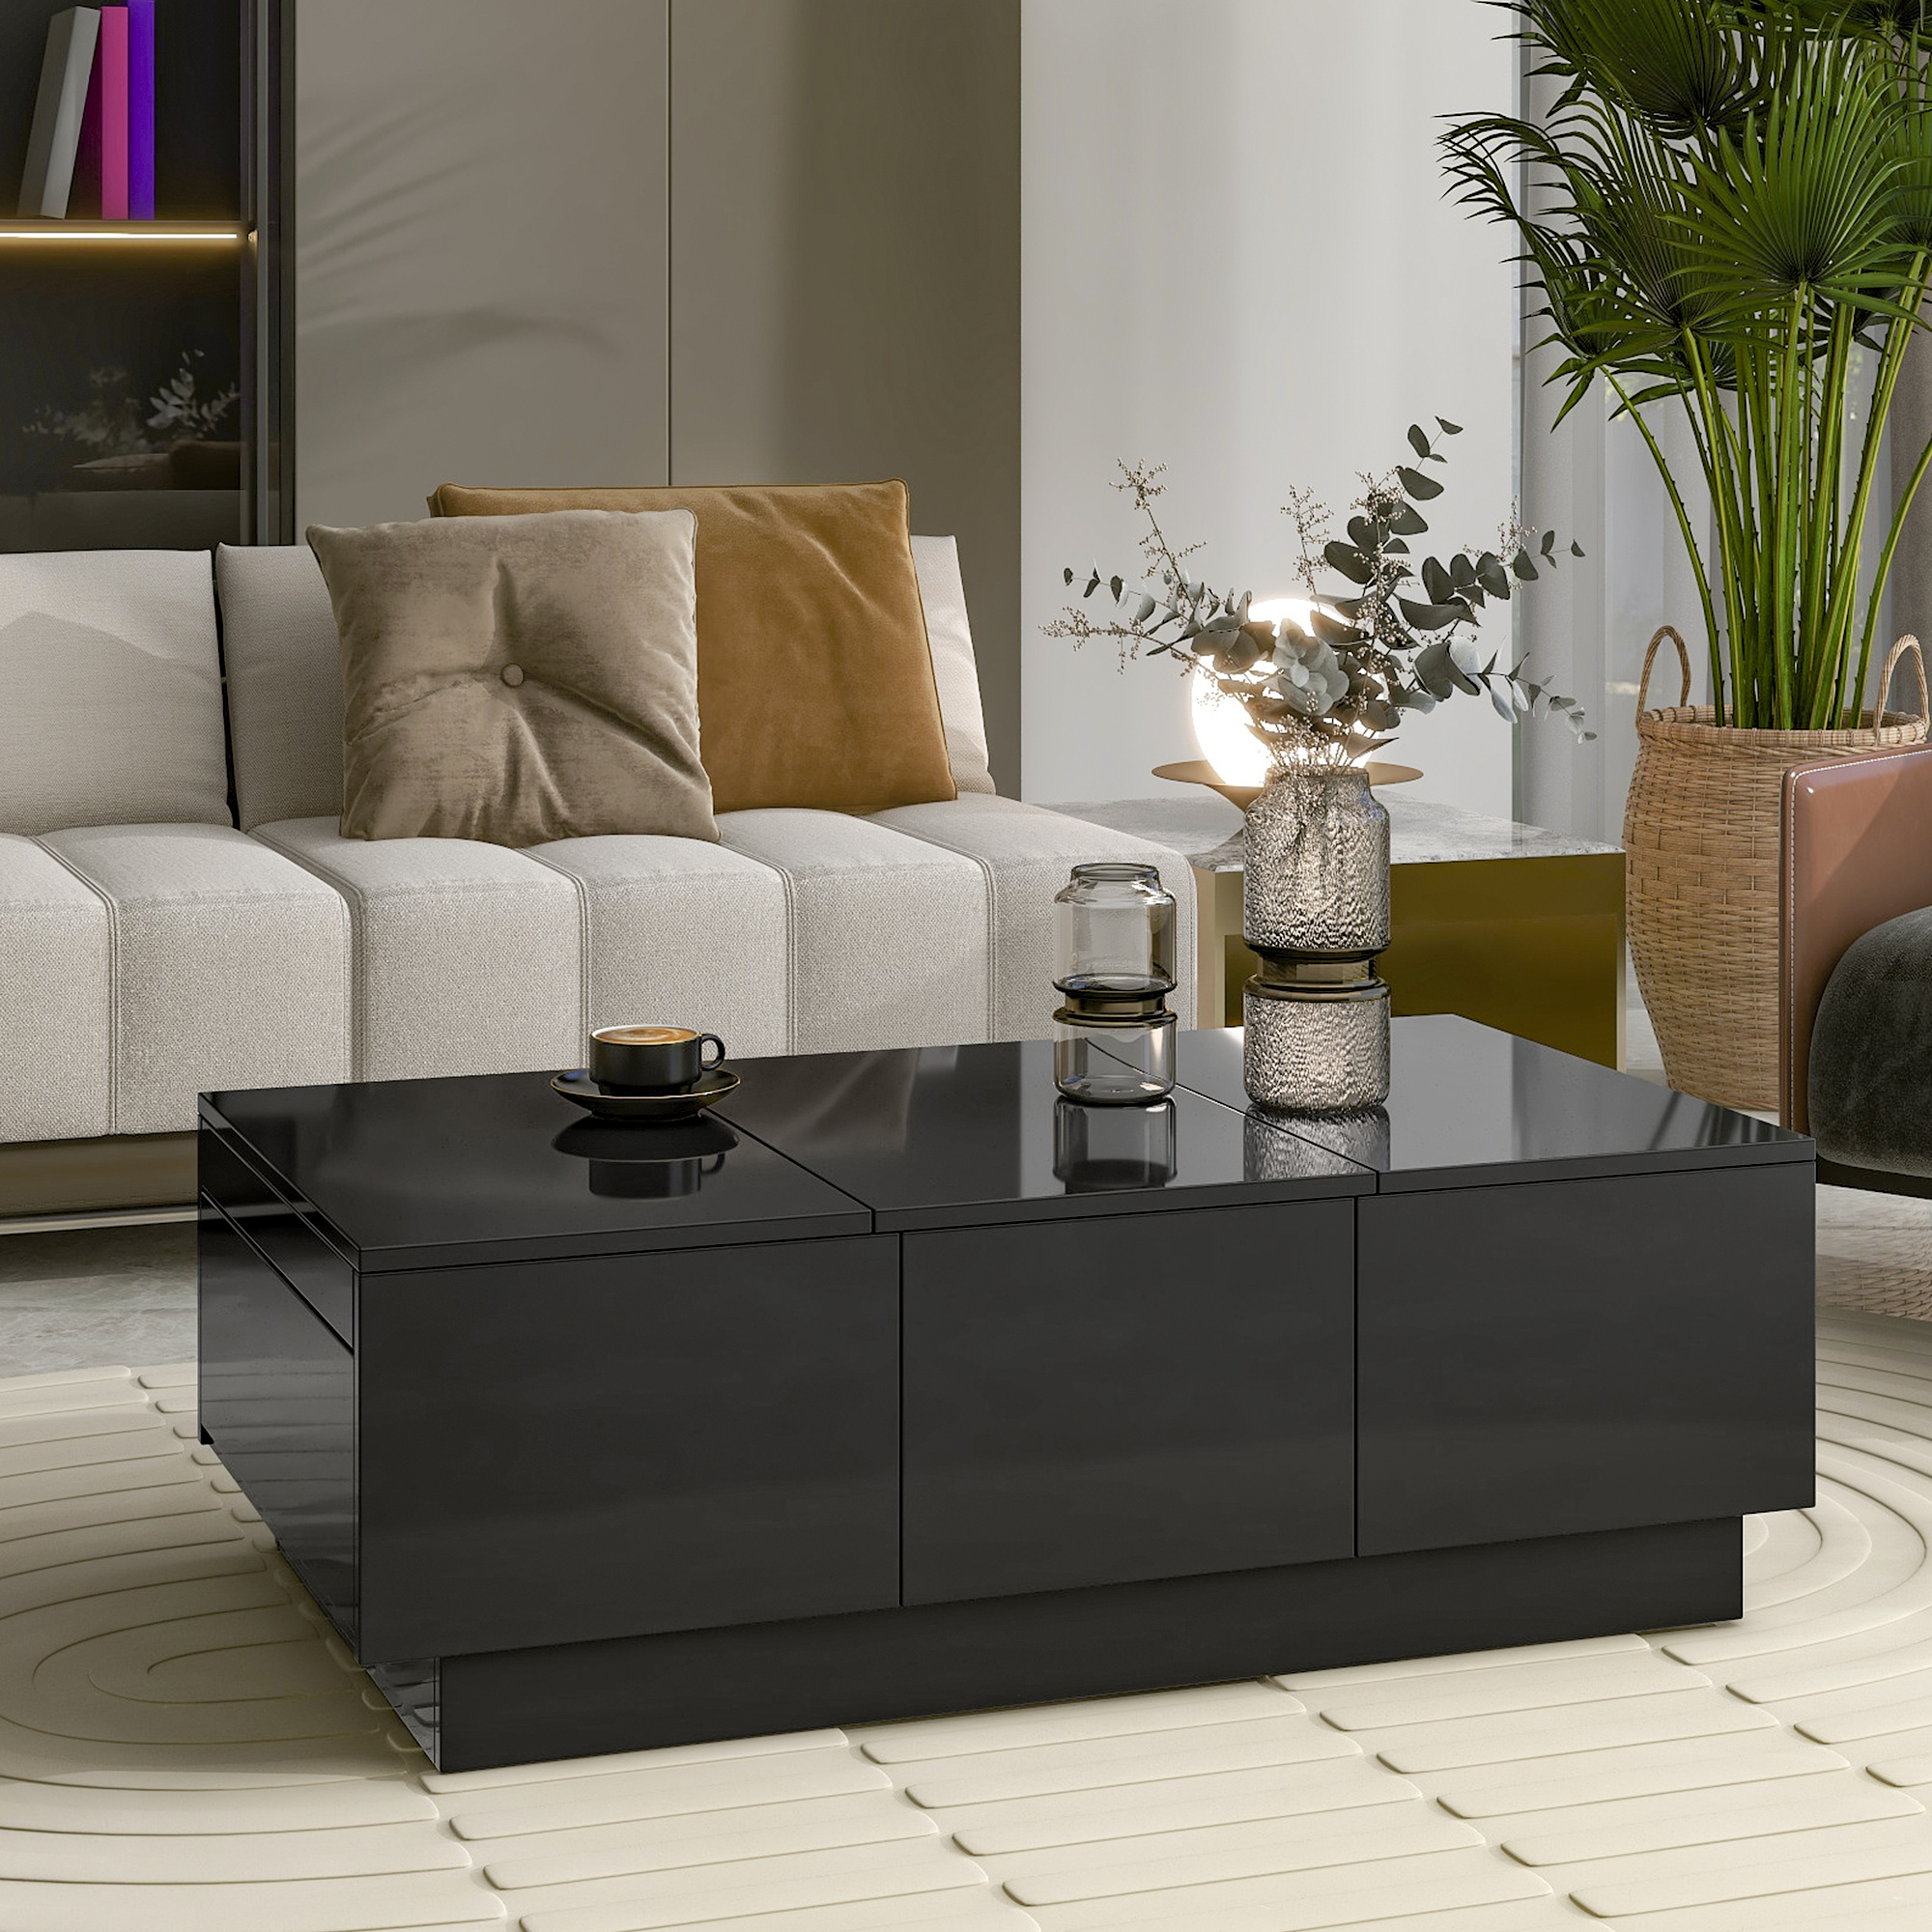 ✨Free shipping✨Leavader® Coffee Table with 2 large Hidden Storage Compartment